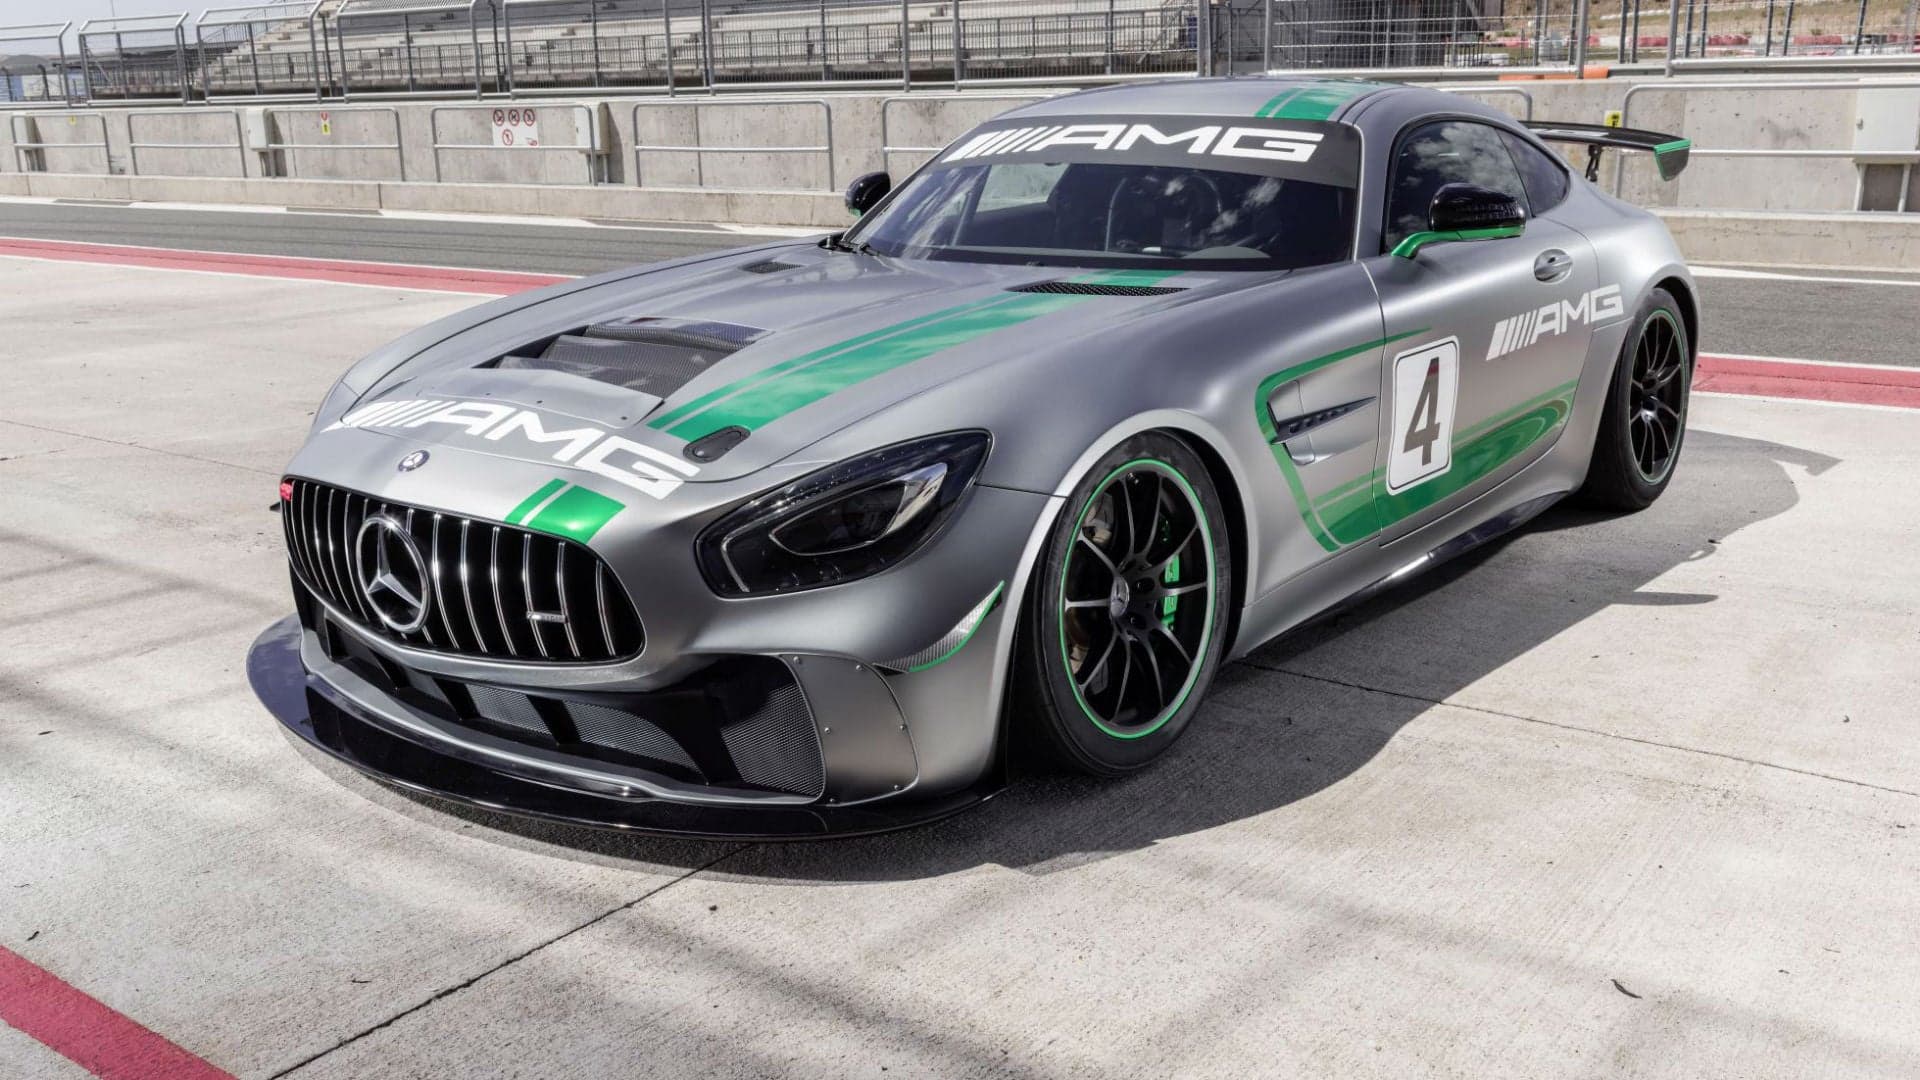 Mercedes-AMG GT4 Race Car Unveiled at Spa-Francorchamps